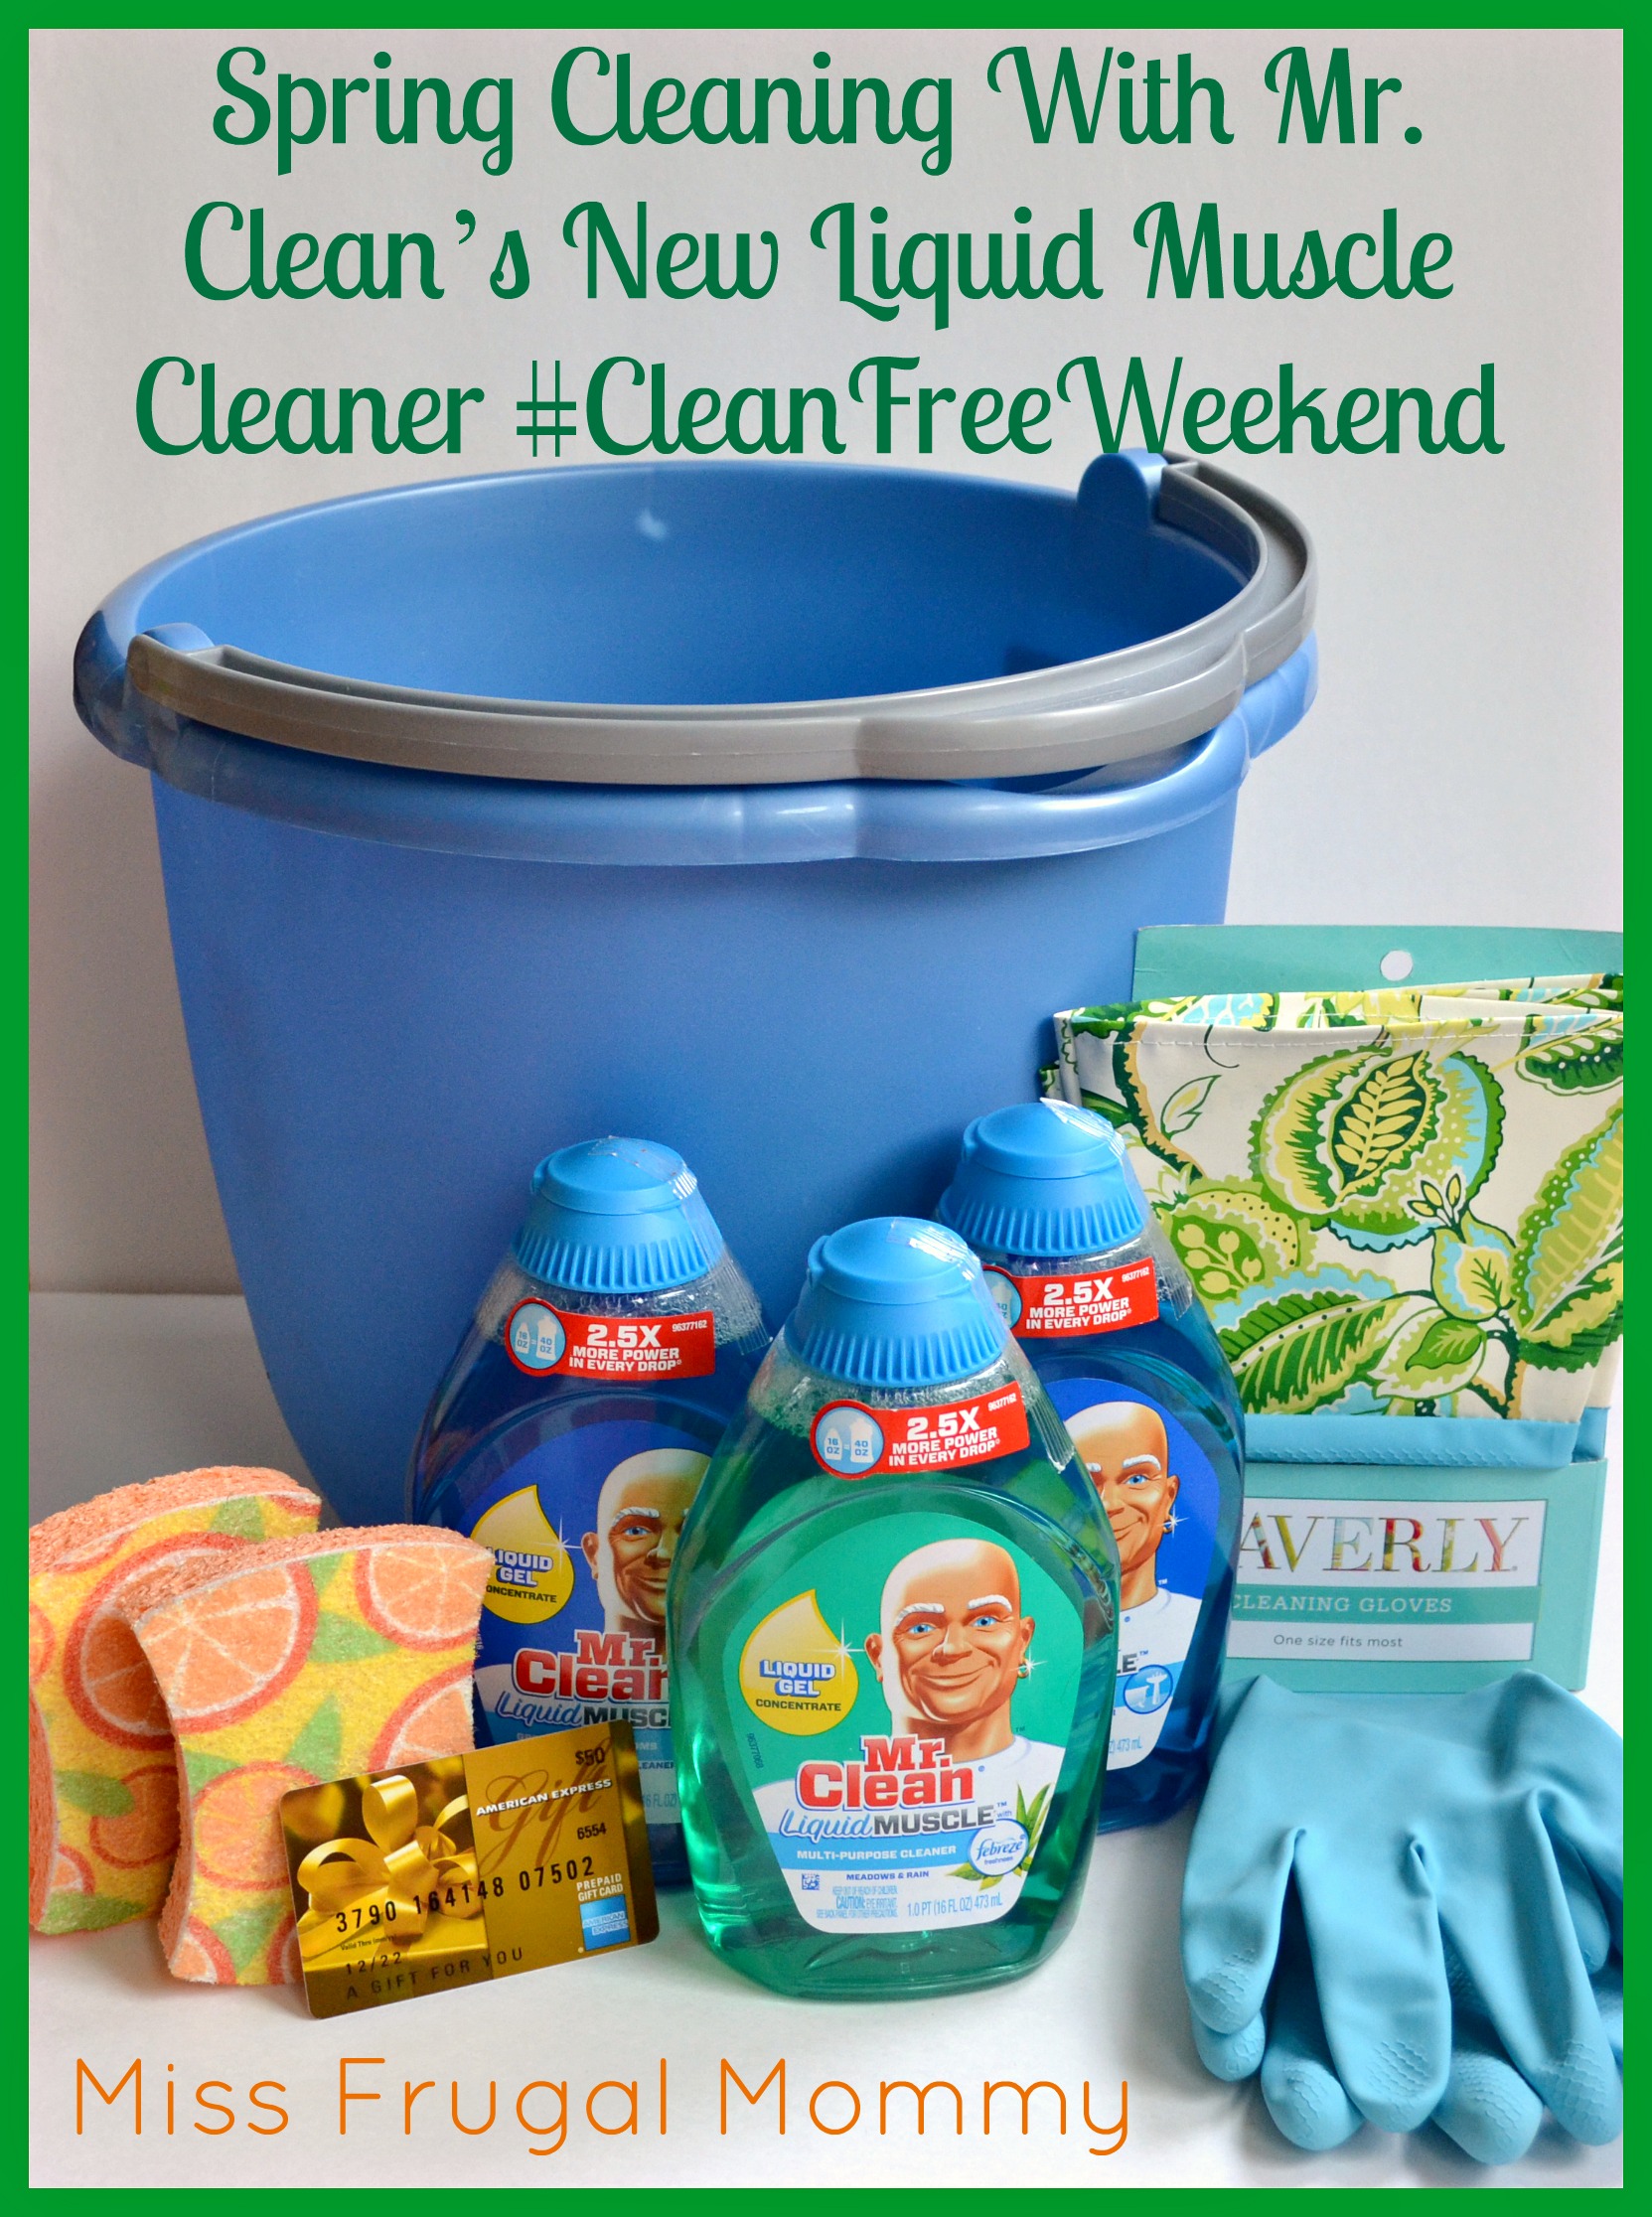 Spring Cleaning With Mr. Clean’s New Liquid Muscle Cleaner #CleanFreeWeekend